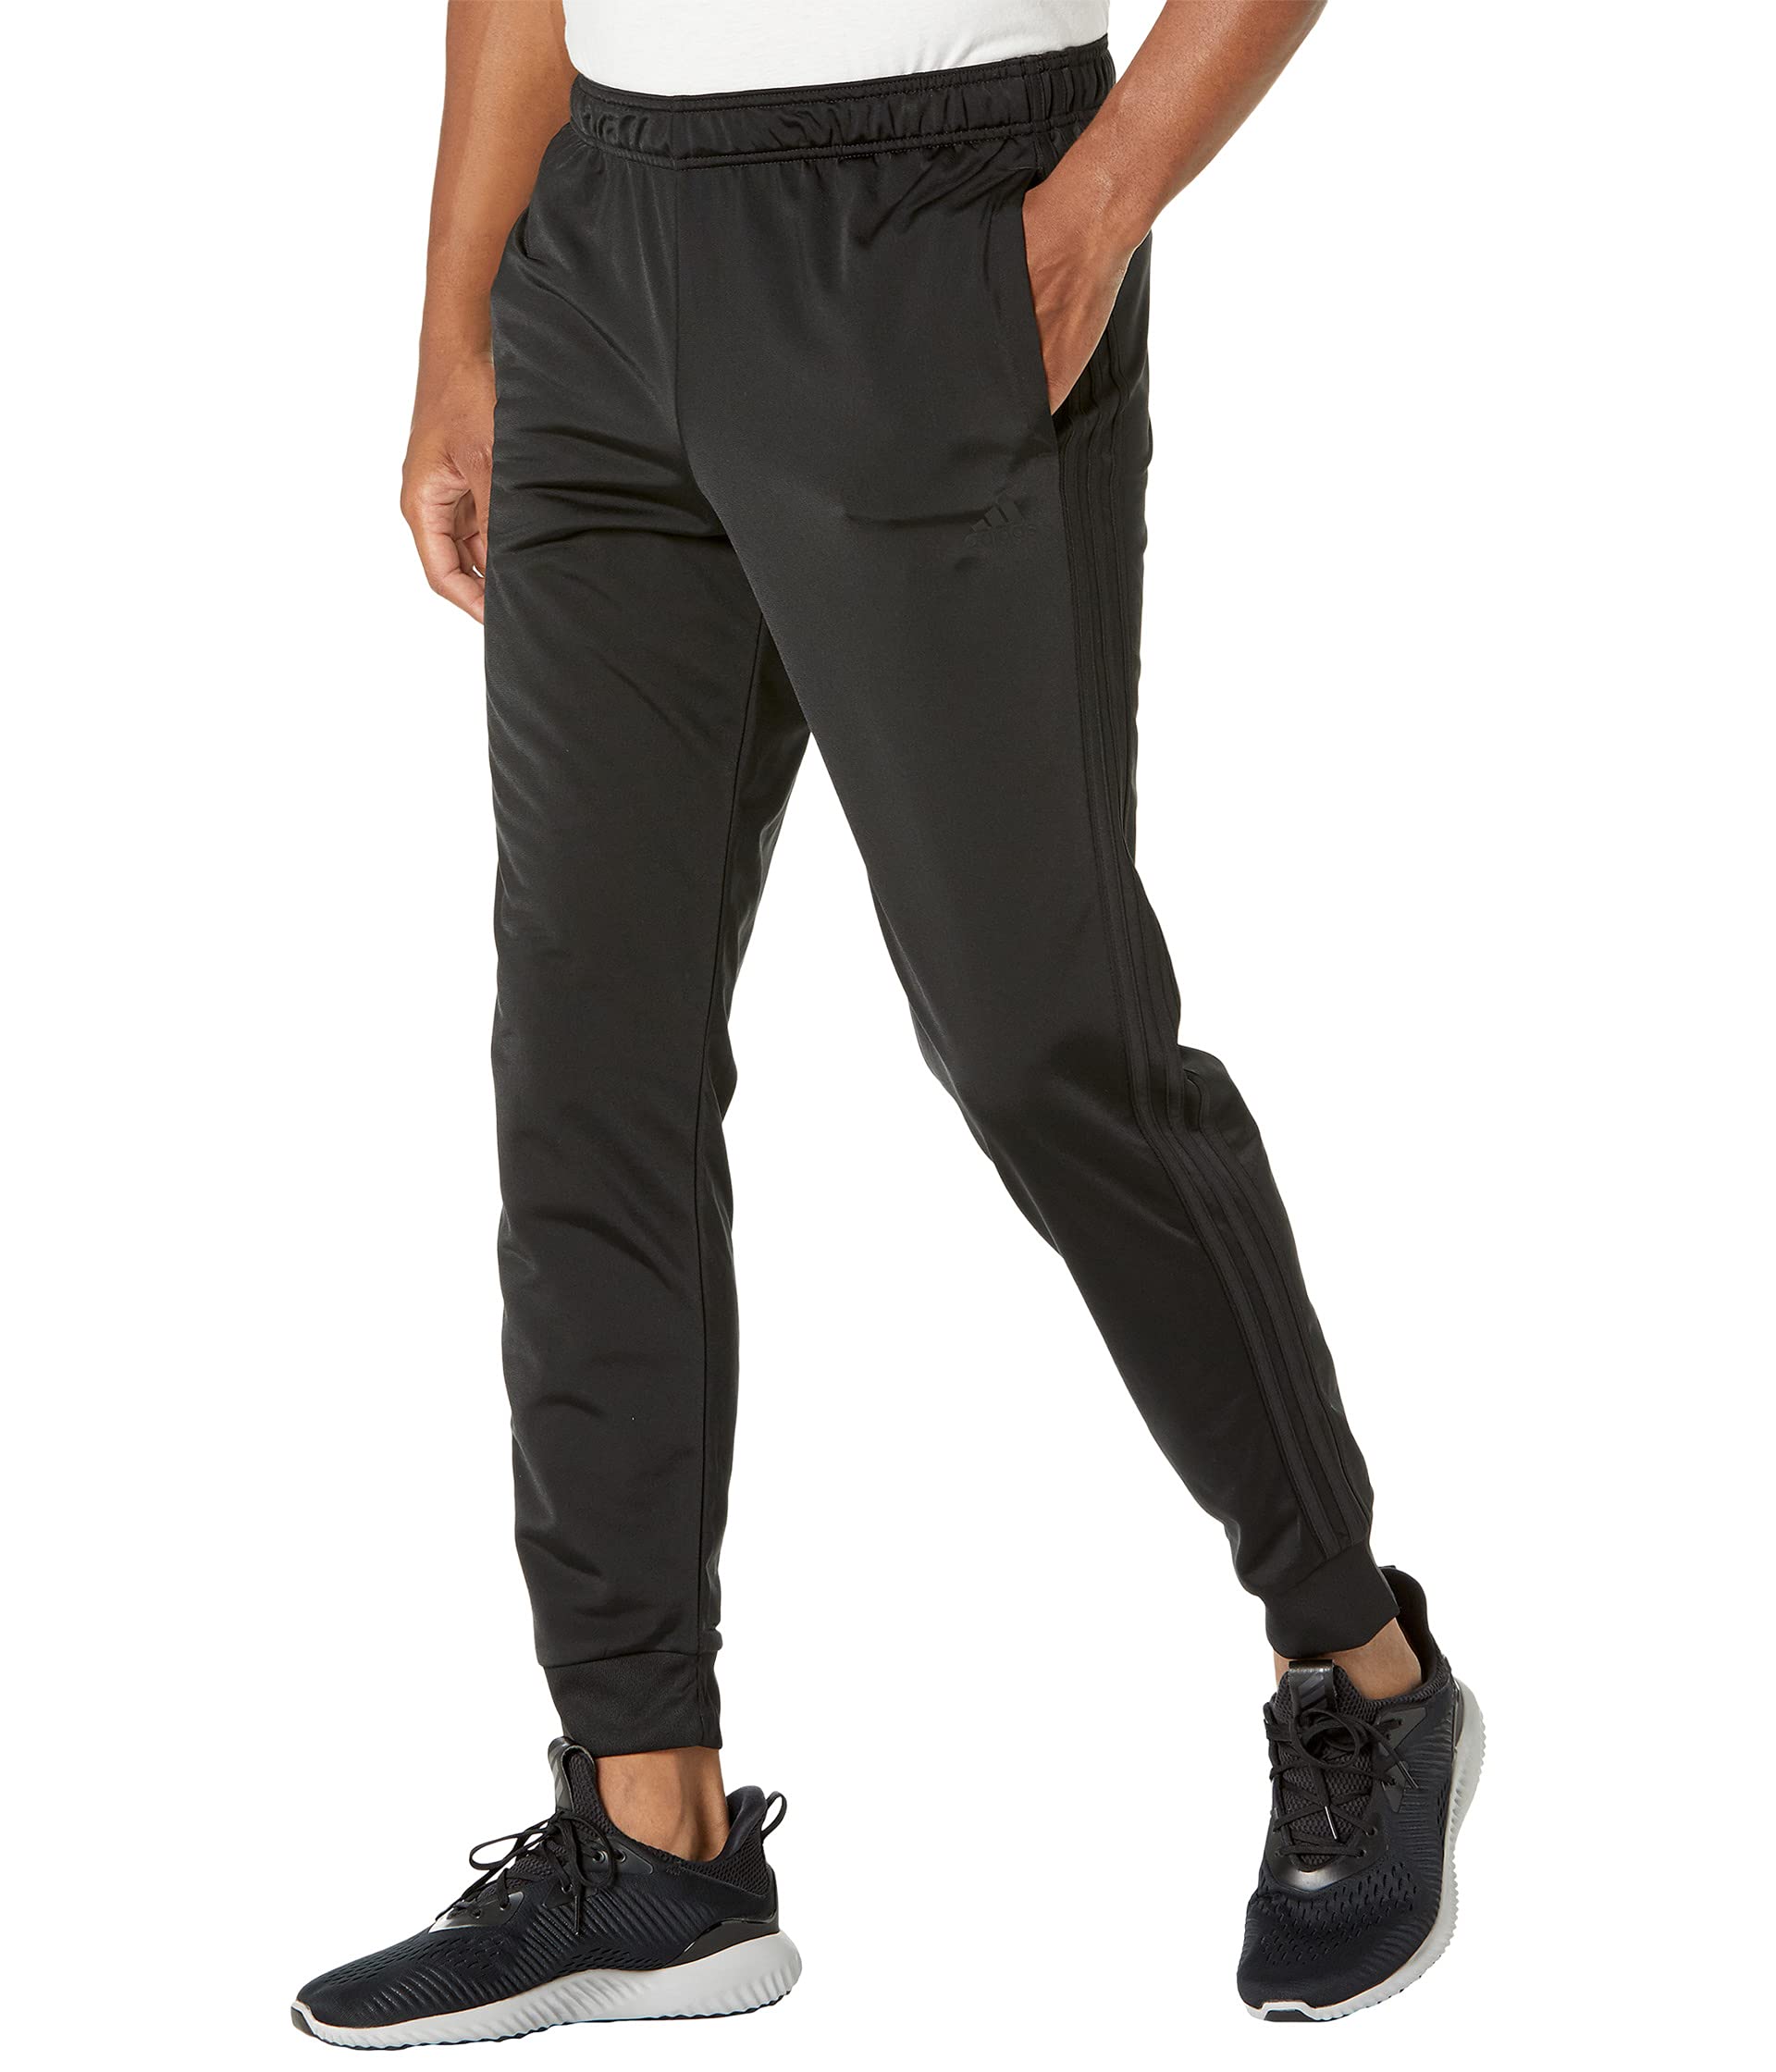 Adidas Essentials 3-Stripes Tricot Jogger Pant Tall Sizes $17.98